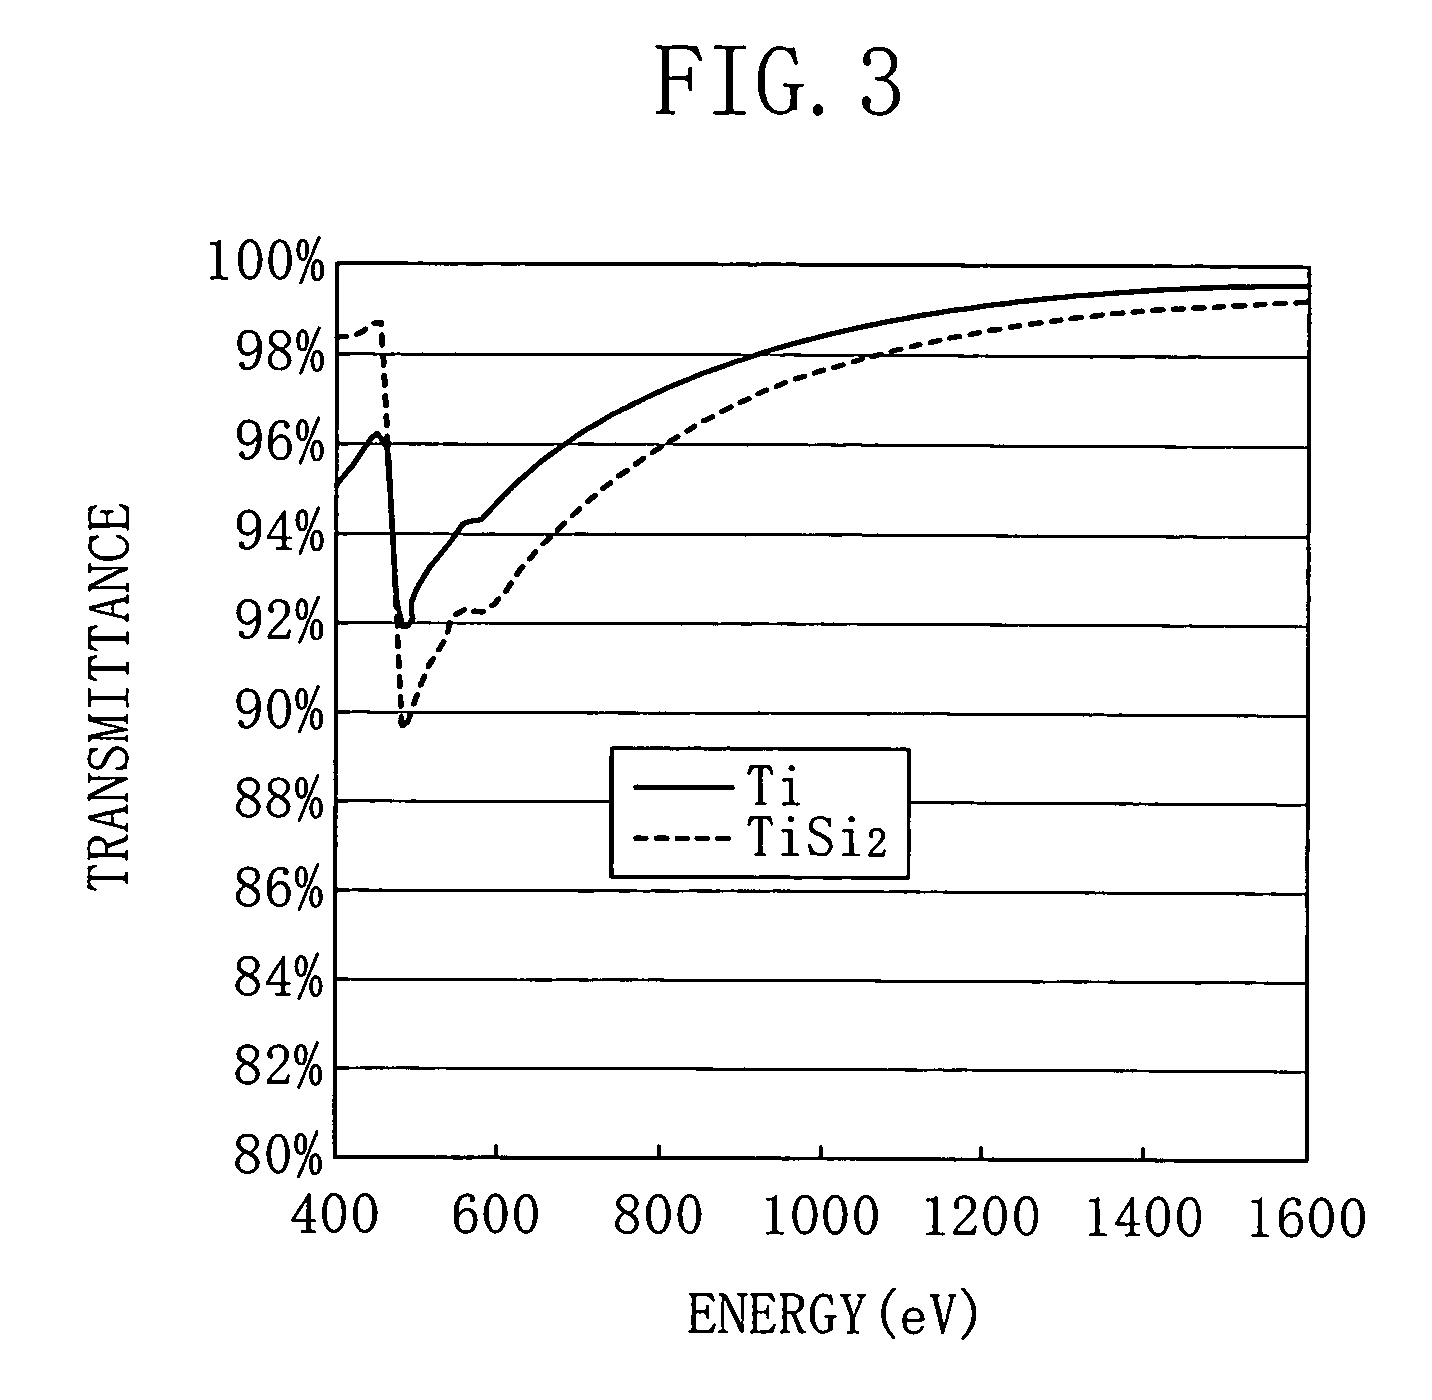 Method for measuring silicide proportion, method for measuring annealing temperature, method for fabricating semiconductor device and x-ray photo receiver